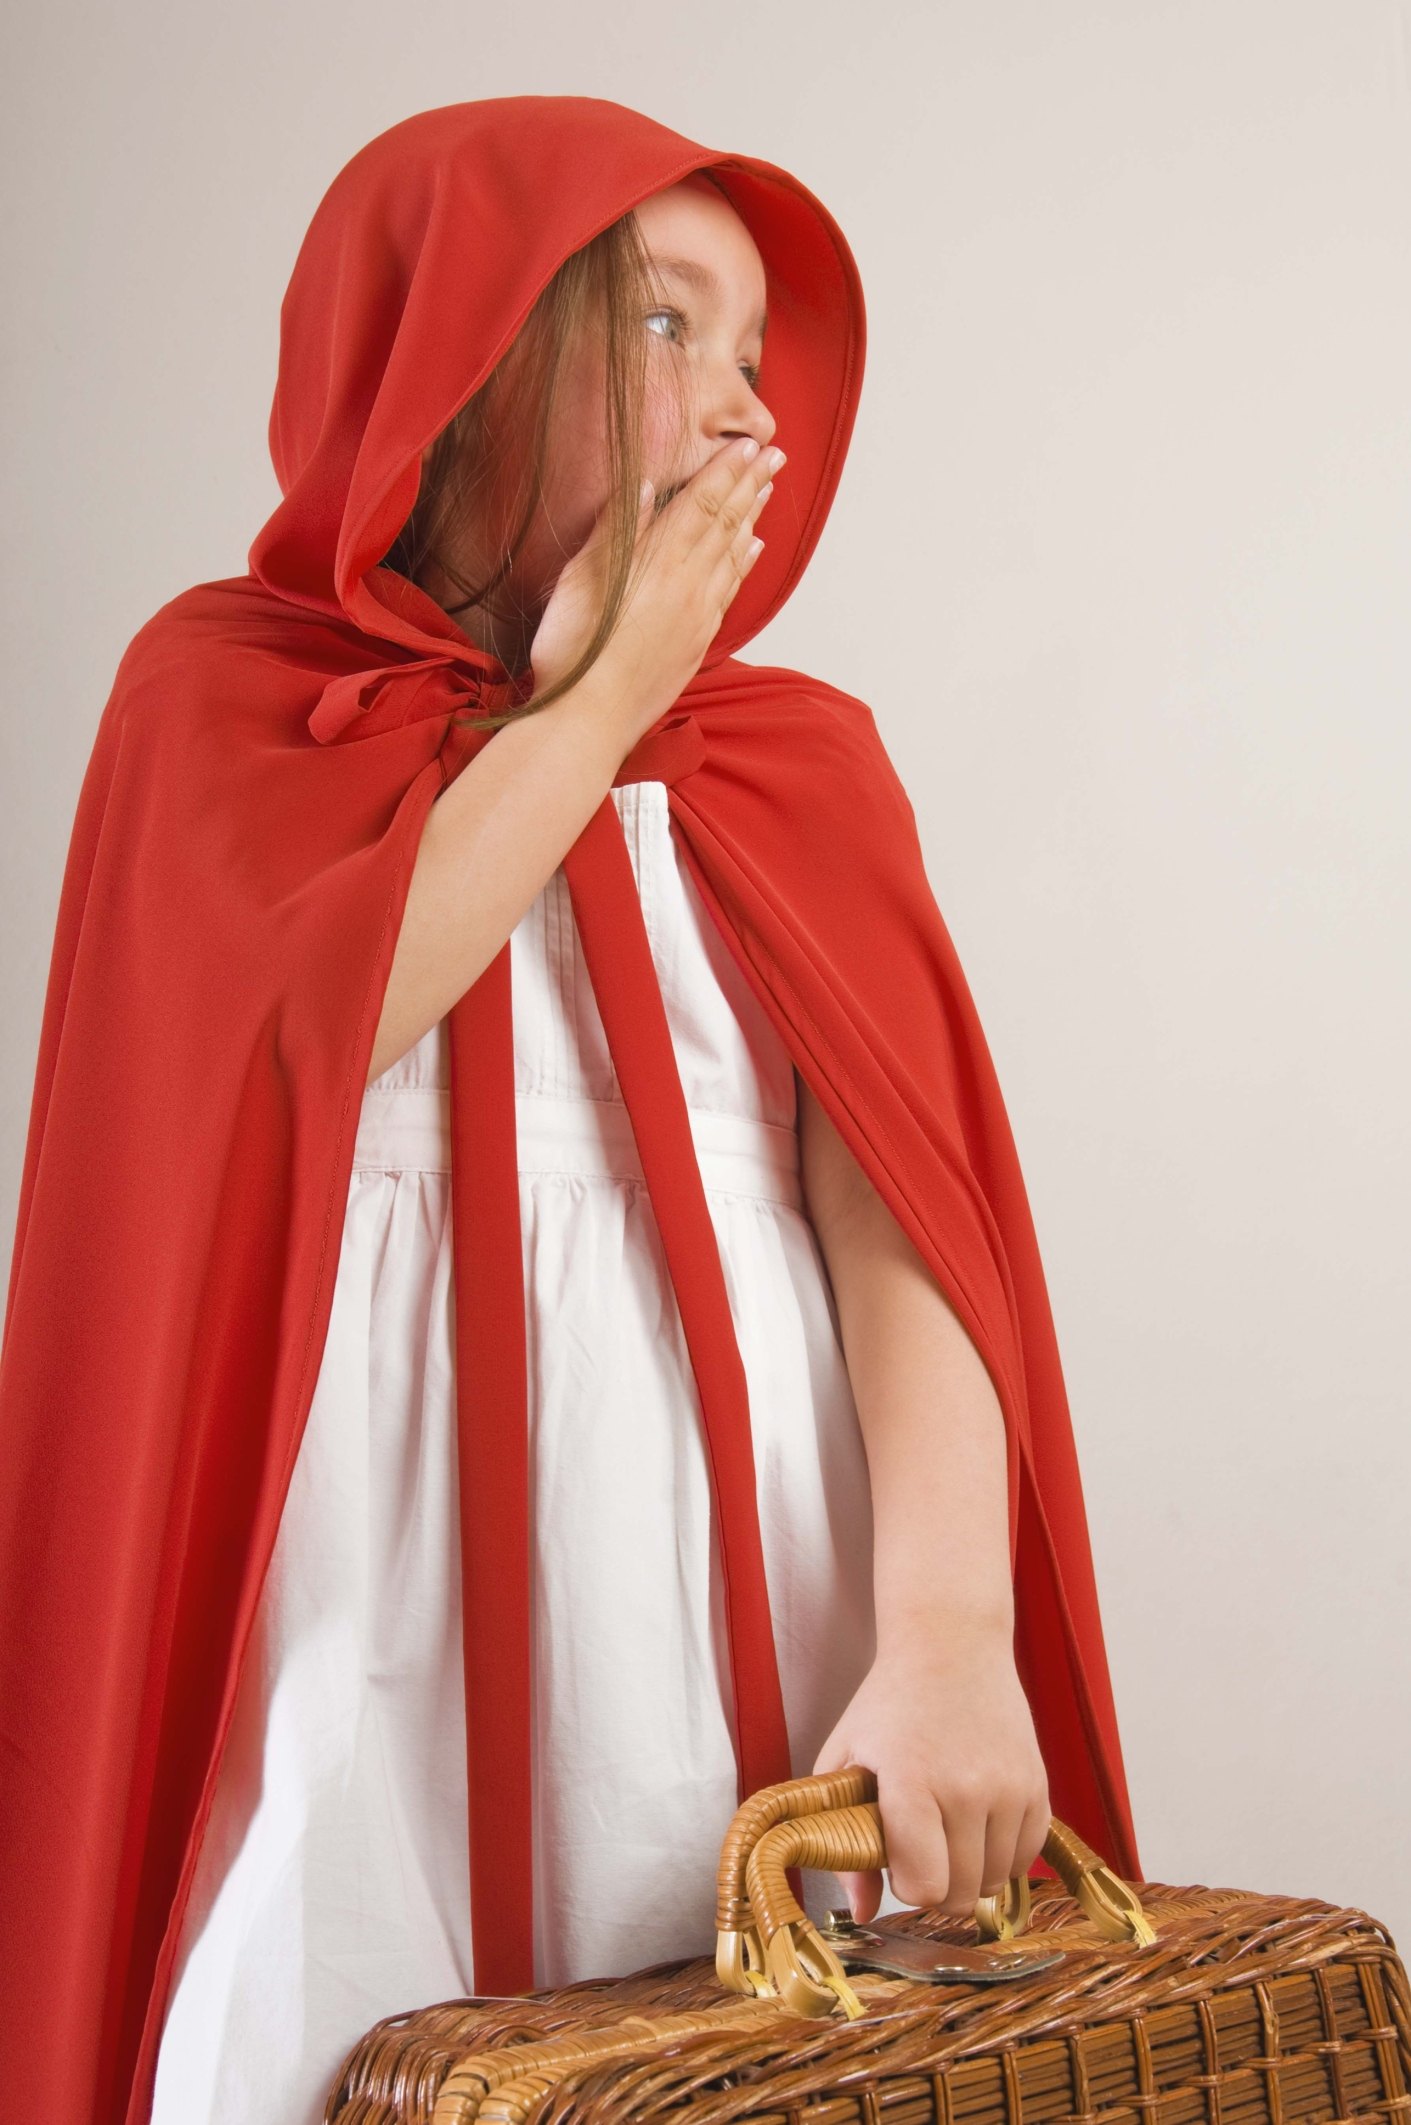 How to Make a Cape With a Hood for a Child Without Sewing | eHow